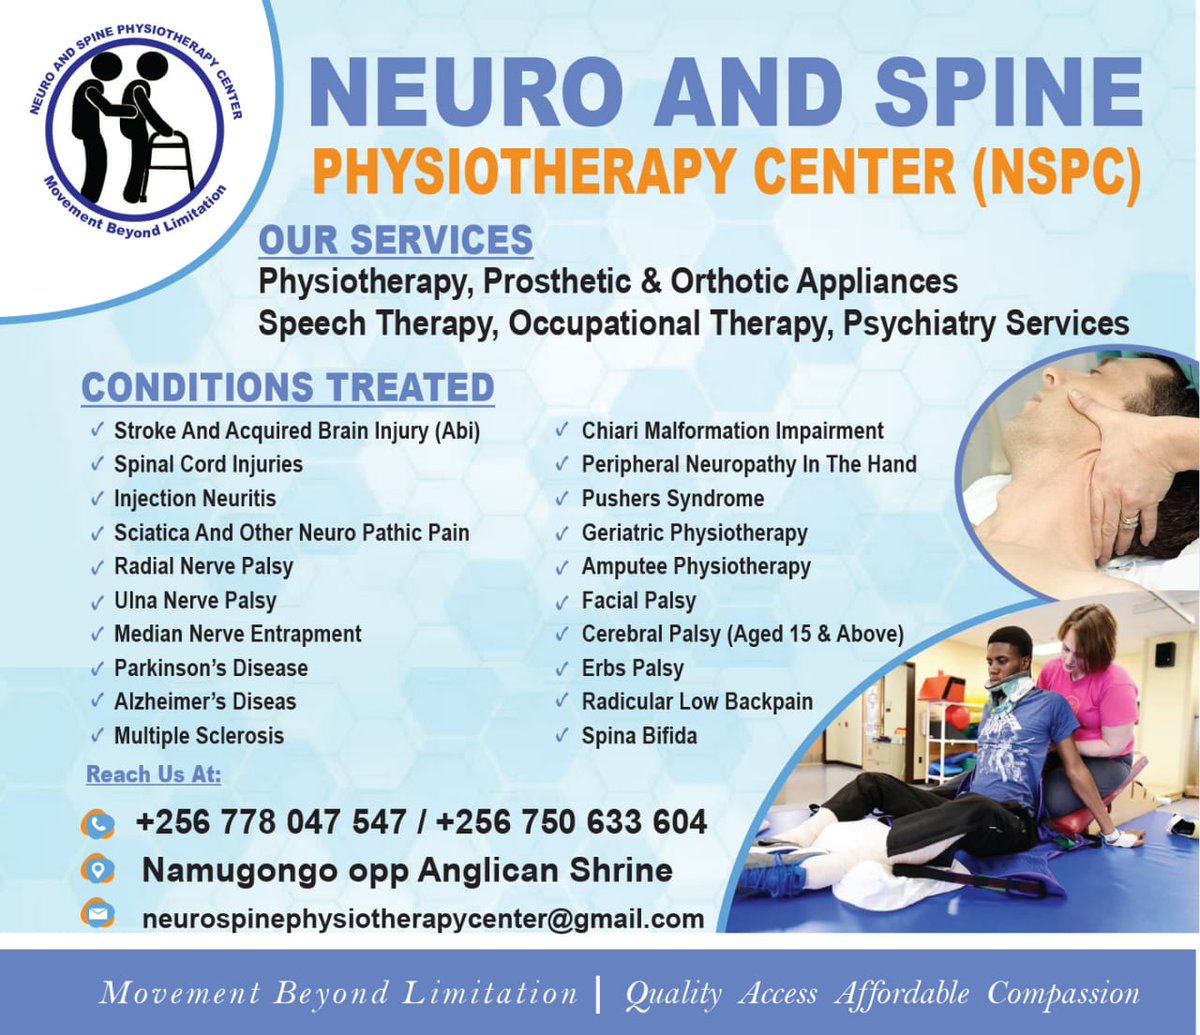 Good afternoon as we start feeling comfortable in the New Year, I would like to introduce to you Neuro and spine Physiotherapy center namugongo, a specialist neurophysiotherapy clinic for the conditions below.for more information .
Click on our website:
…ne-physiotherapy-center.business.site